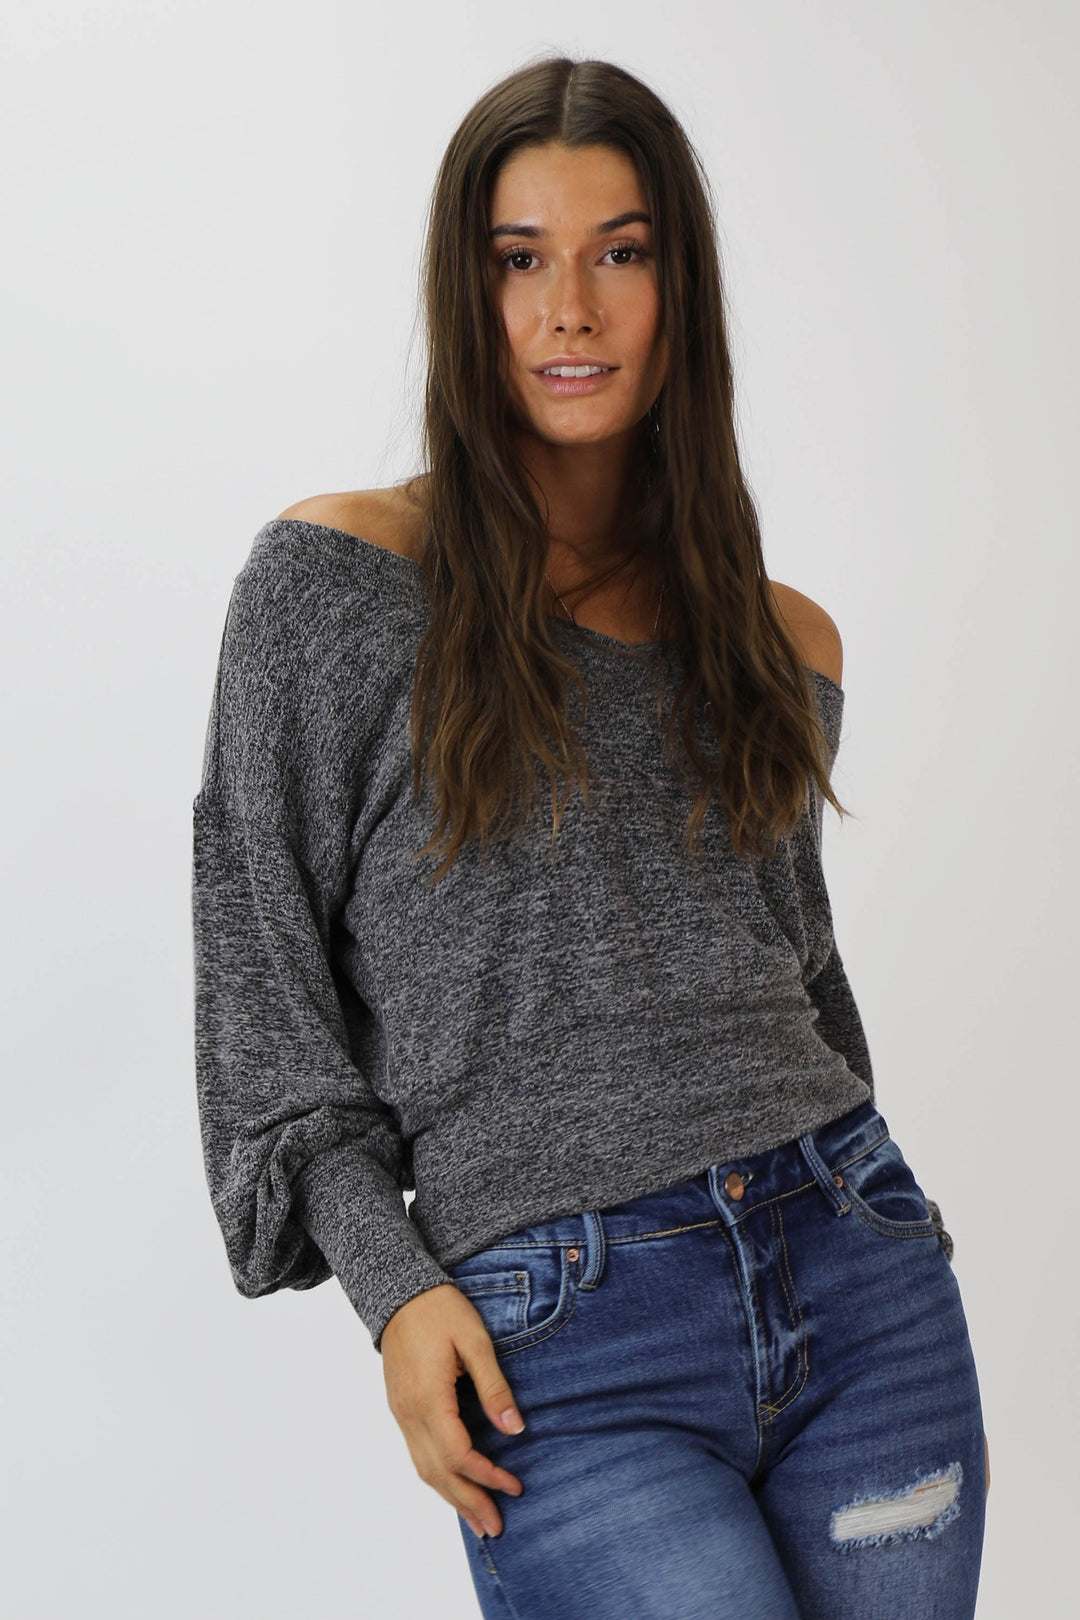 image of a female model wearing a OLLIE HEATHERED BLACK TOP TOPS